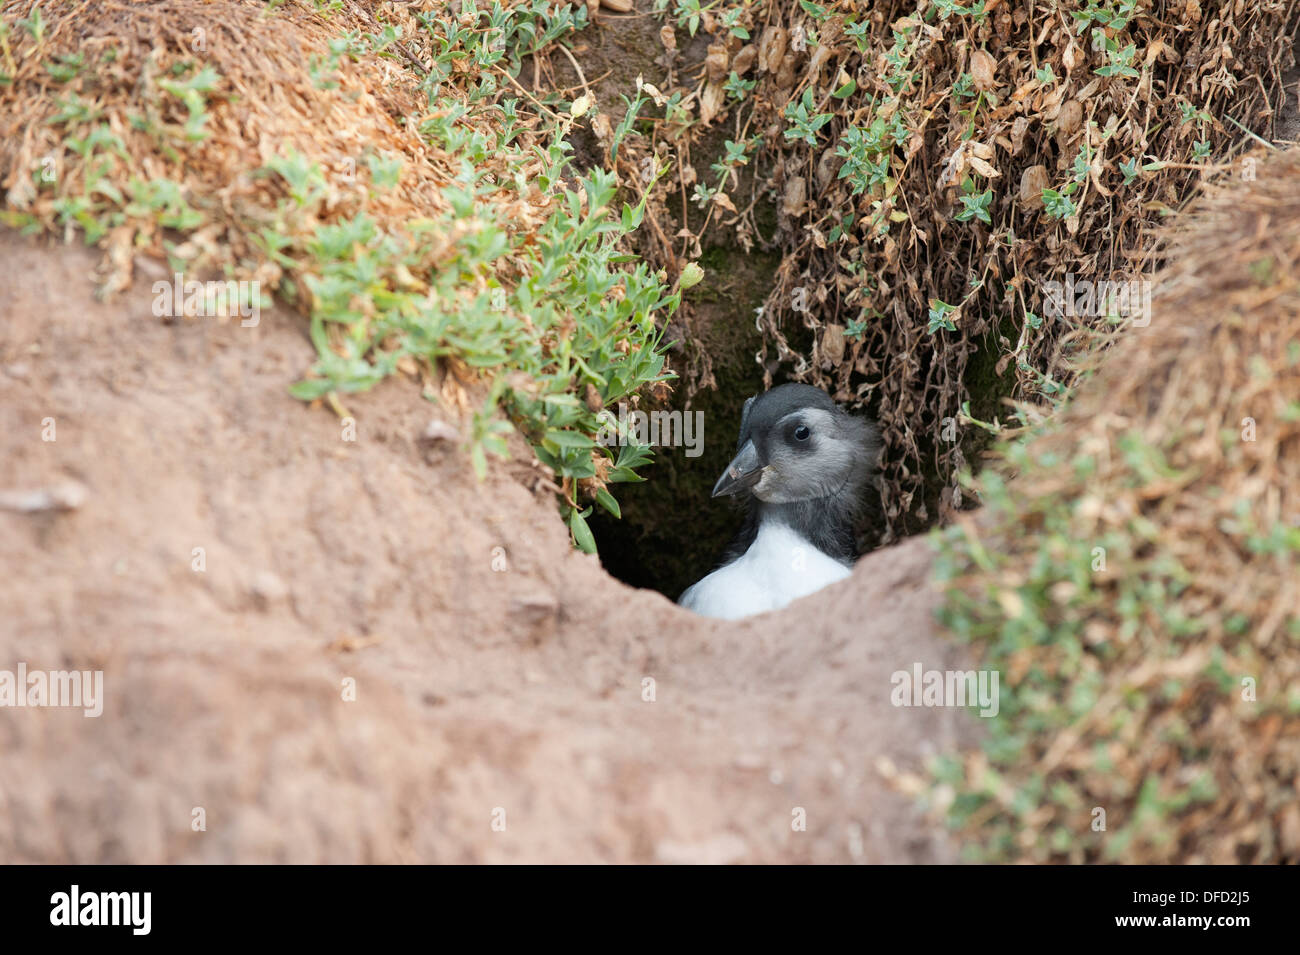 Puffling, Fratercula arctica, in a burrow, Skokholm, South Pembrokeshire, Wales, United Kingdom Stock Photo